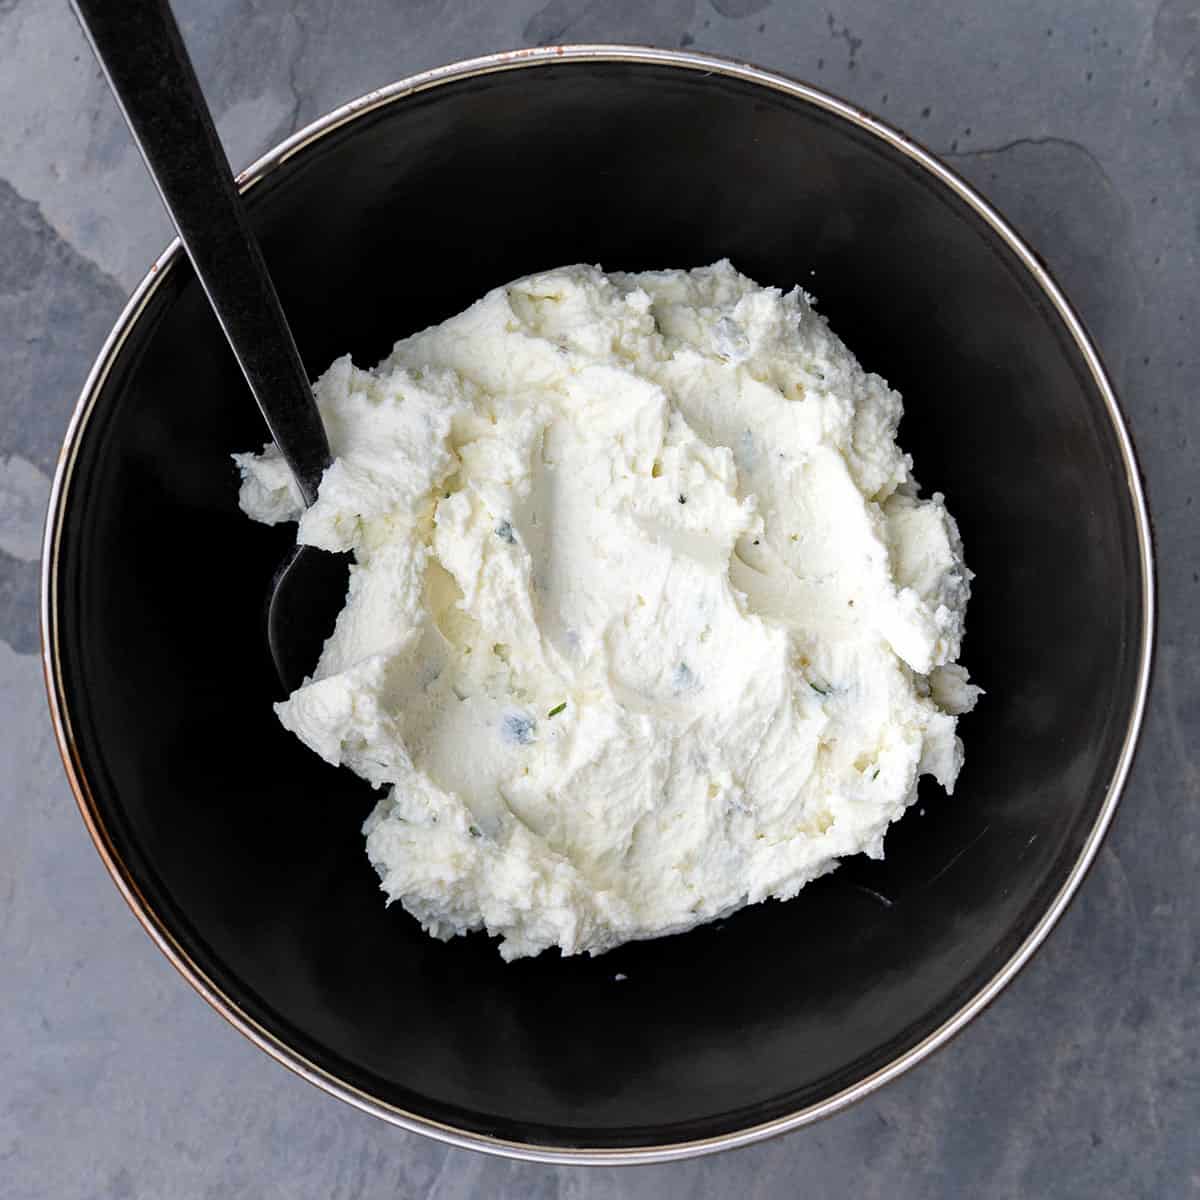 goat cheese spread ingredients mixed together until smooth.